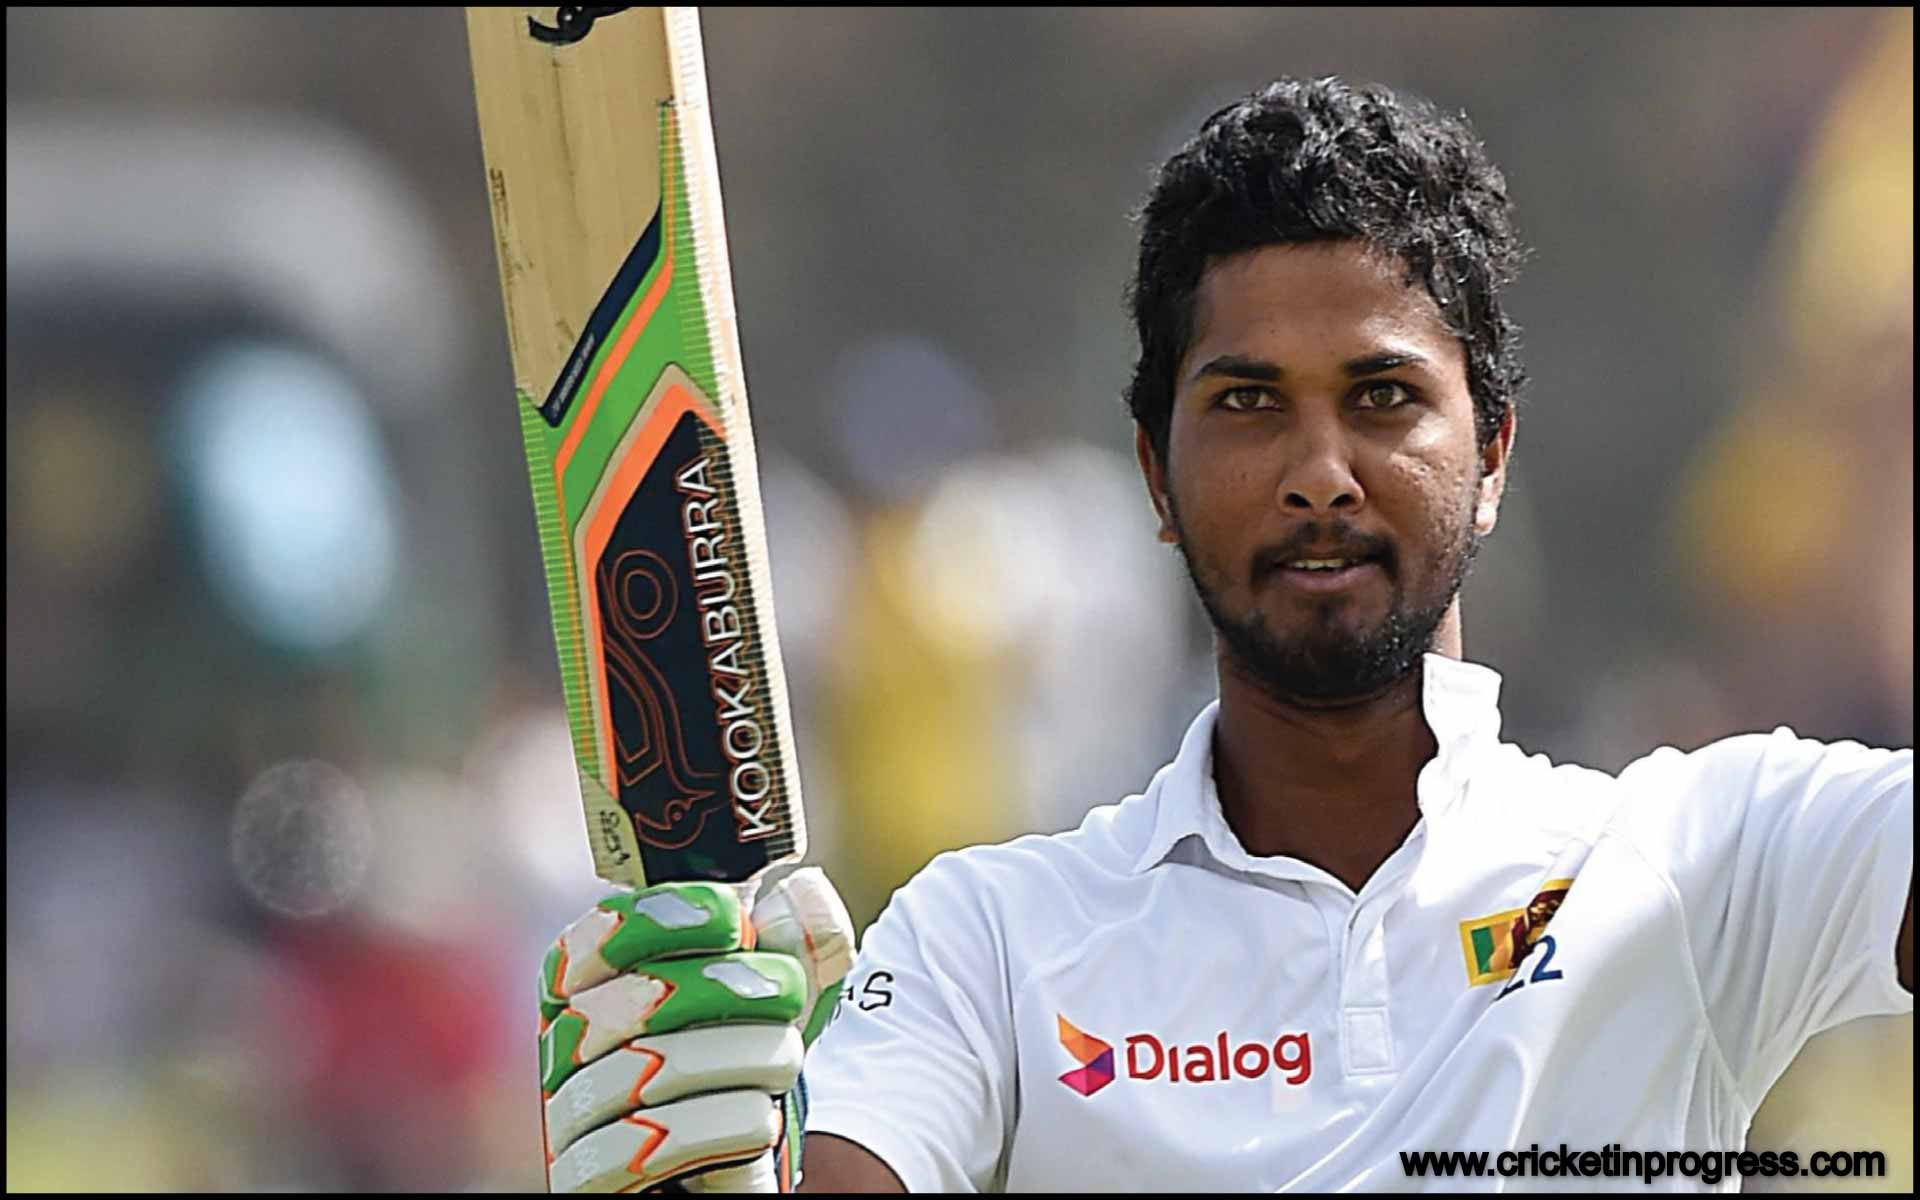 What happened to Dinesh Chandimal, the captain